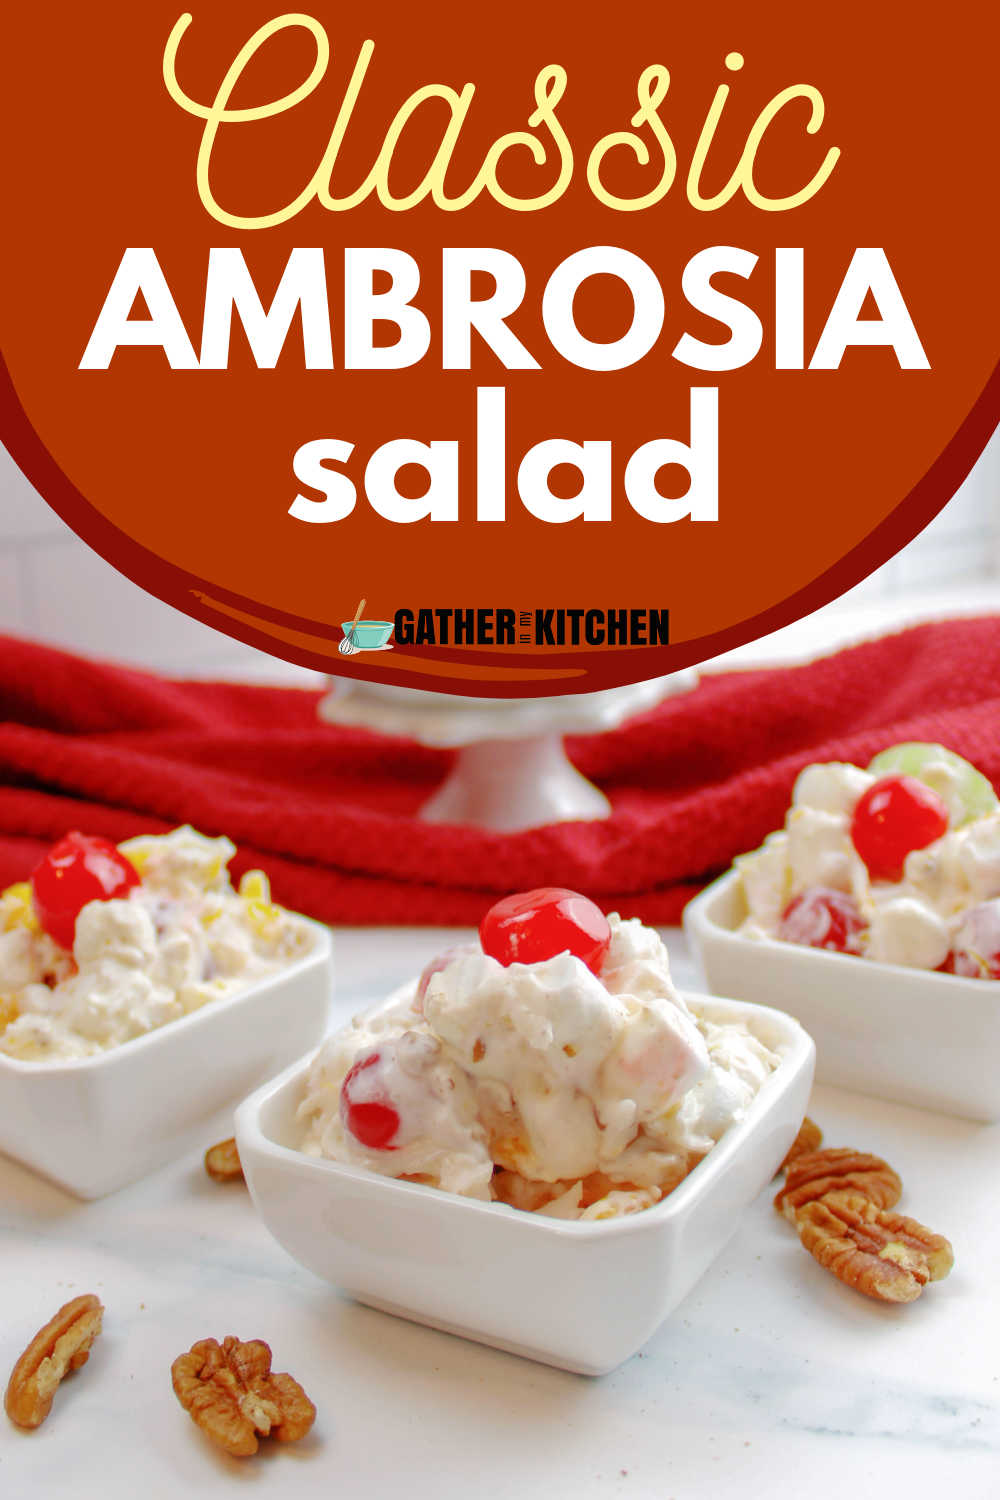 Pin Image: top says "Classic ambrosia salad" and bottom has ambrosia salad in small square bowls.